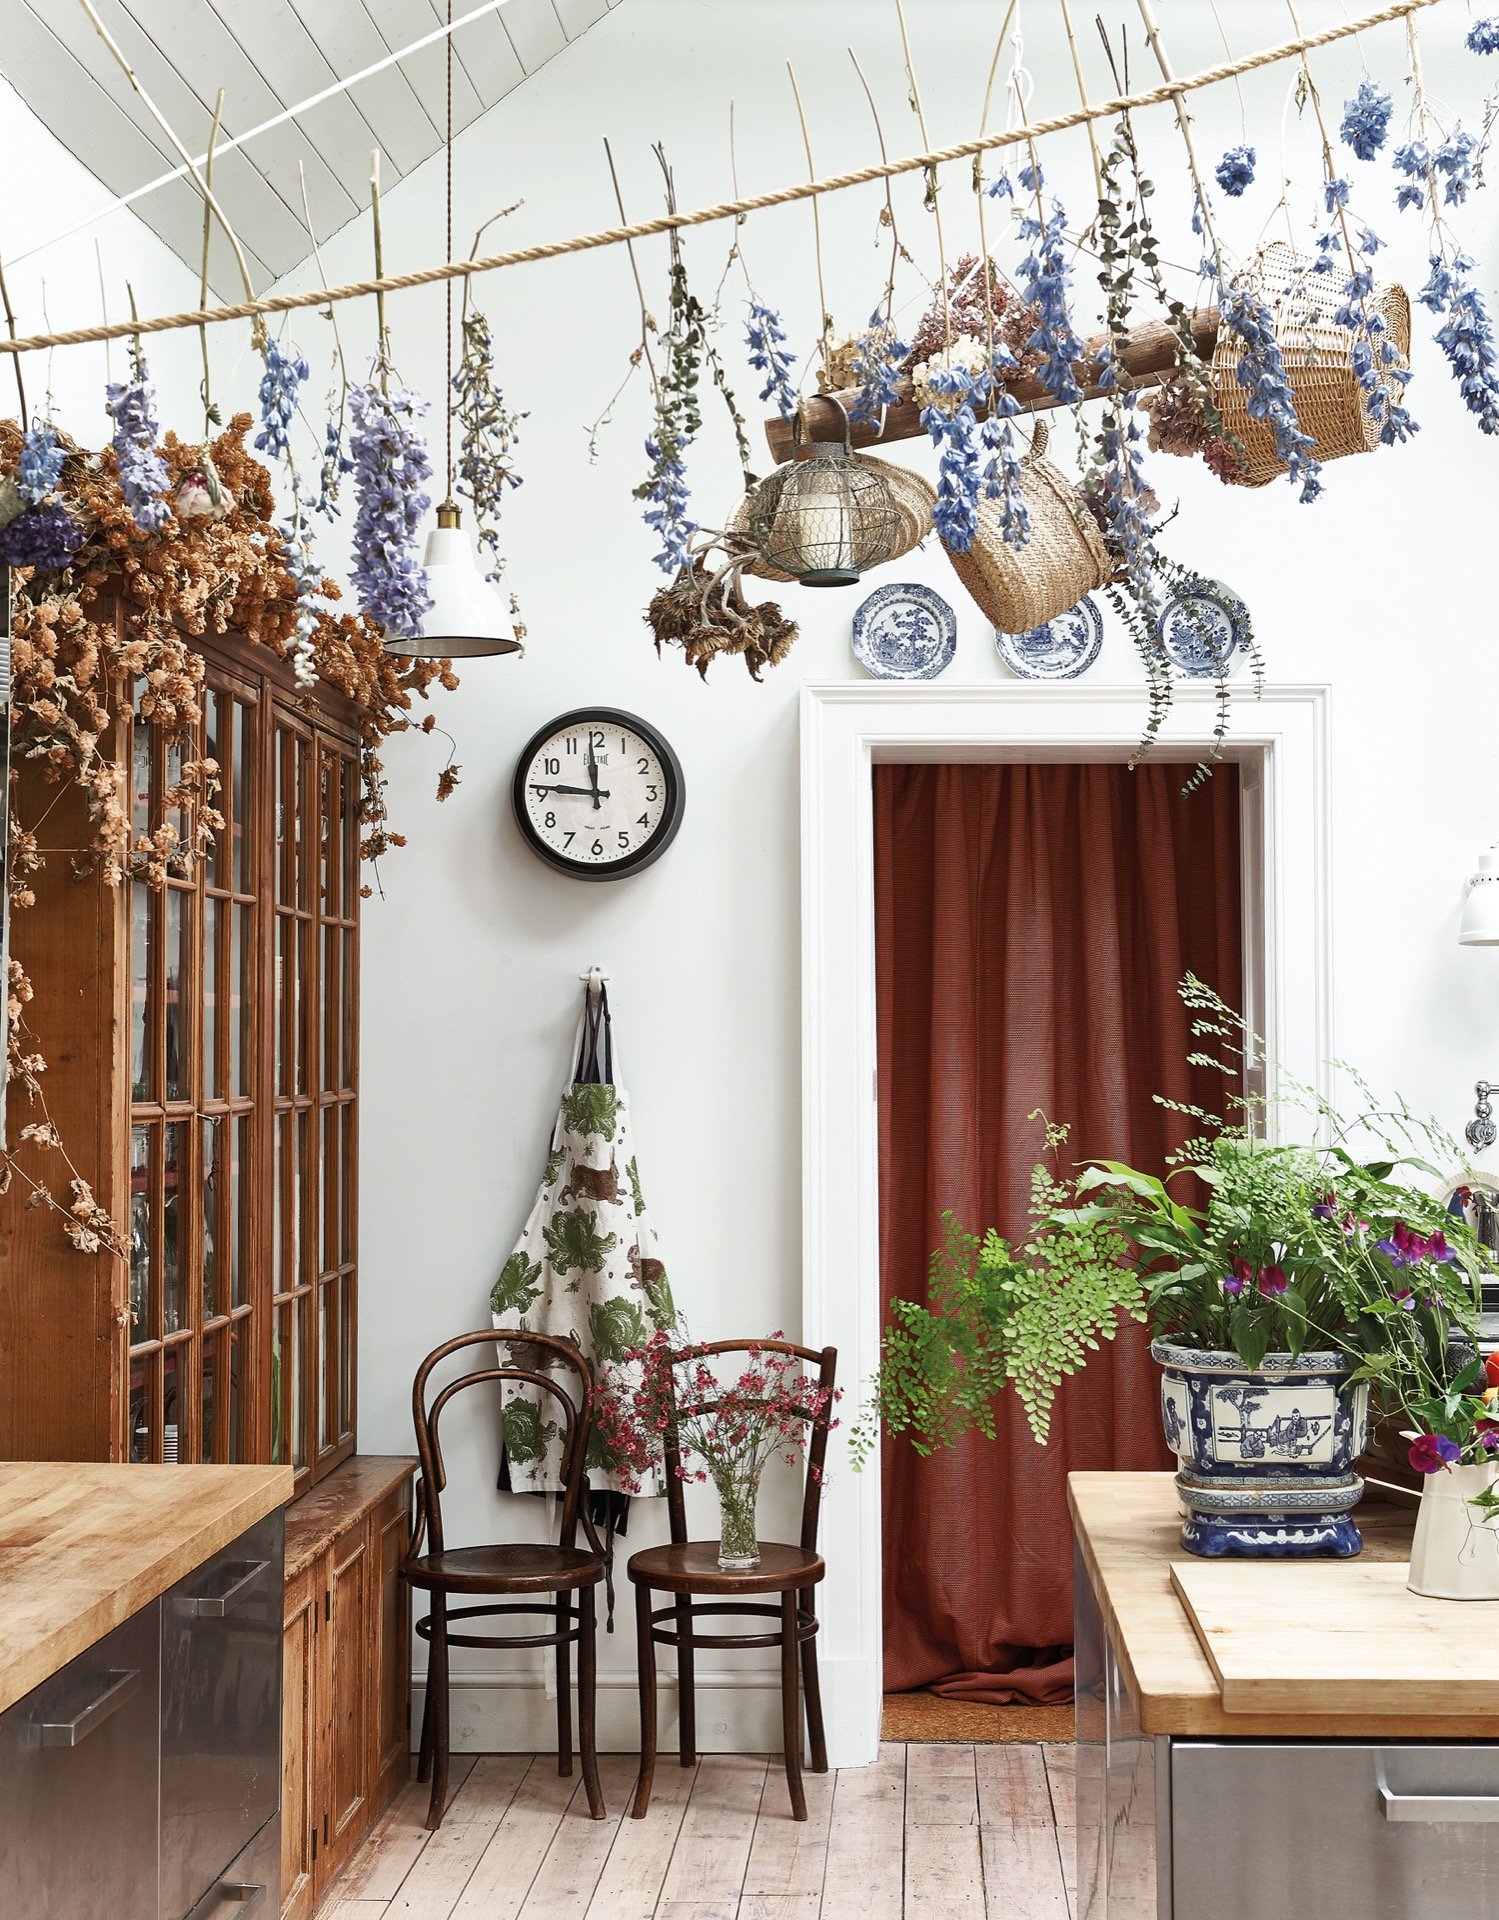 a classic kitchen with dried flowers& baskets hanging up